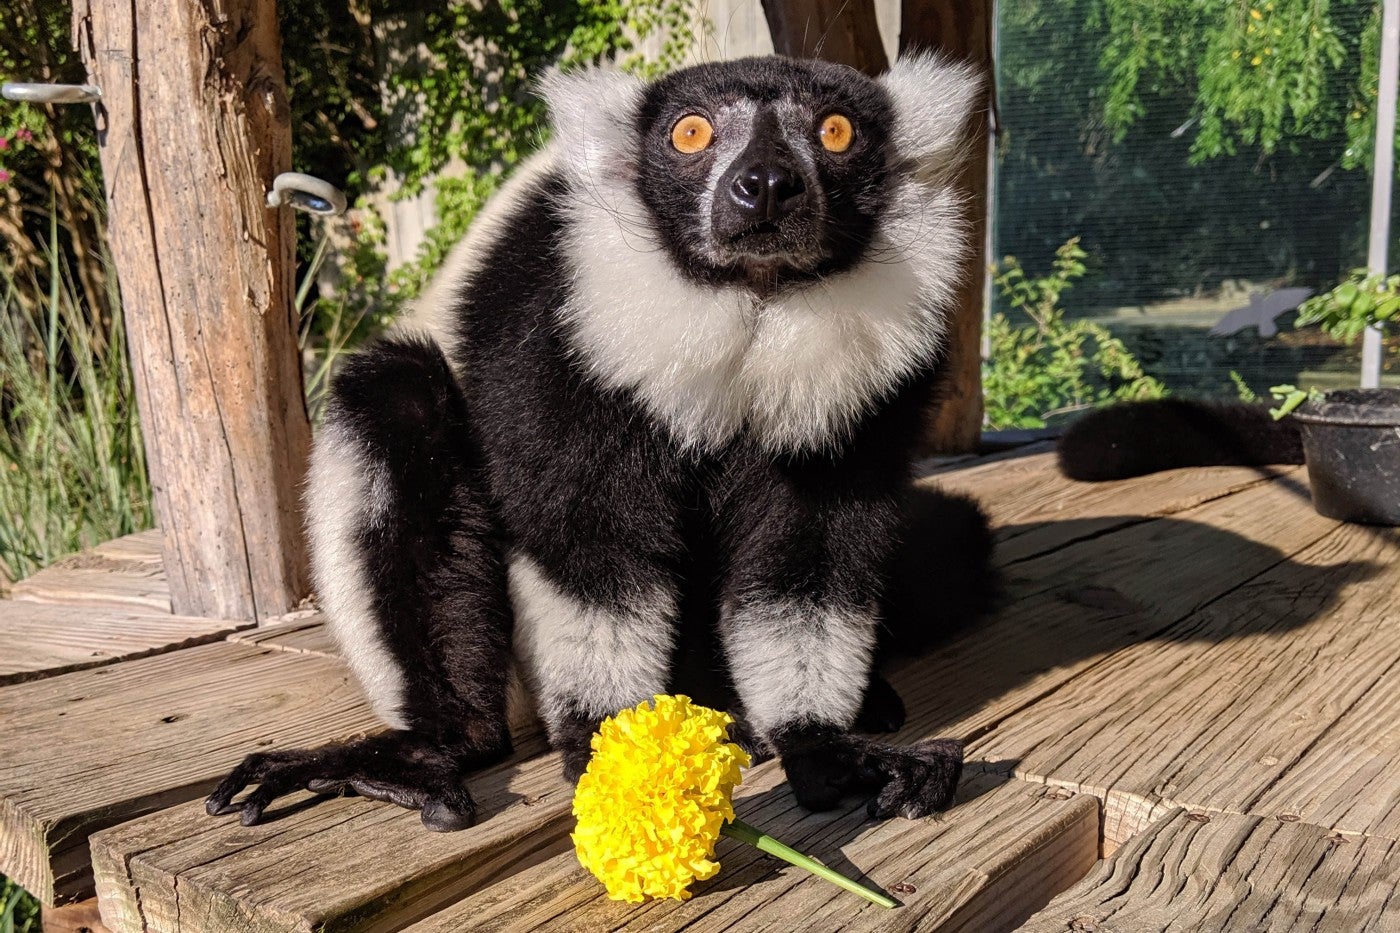 Black-and-white ruffed lemur Wiley sits in the gazebo, holding a yellow flower.